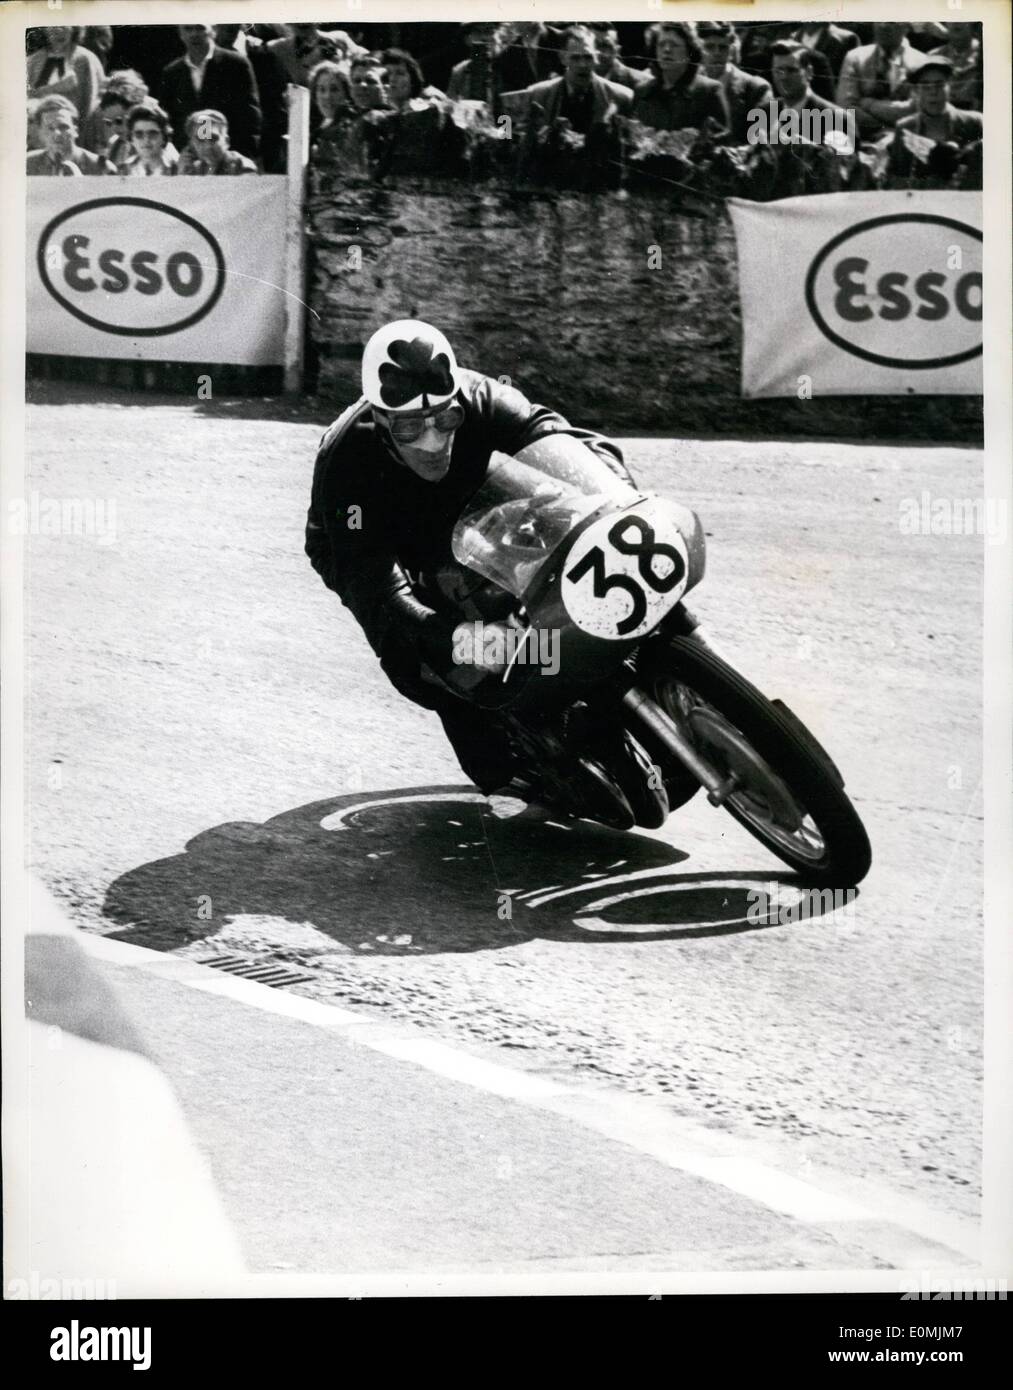 Jun. 13, 1955 - 13-6-55 Reg Armstrong takes second place in Senior T.T. on the Isle of Man. Keystone Photo Shows: Reg. Armstrong of Dublin at speed at Quarter Bridge when he took second place in the Senior T.T. on the Isle of Man. His speed was 96.74 m.p.h. on a Gilera. The event was won by Geoff Duke at the record speed of 97.93 m.p.h. Stock Photo